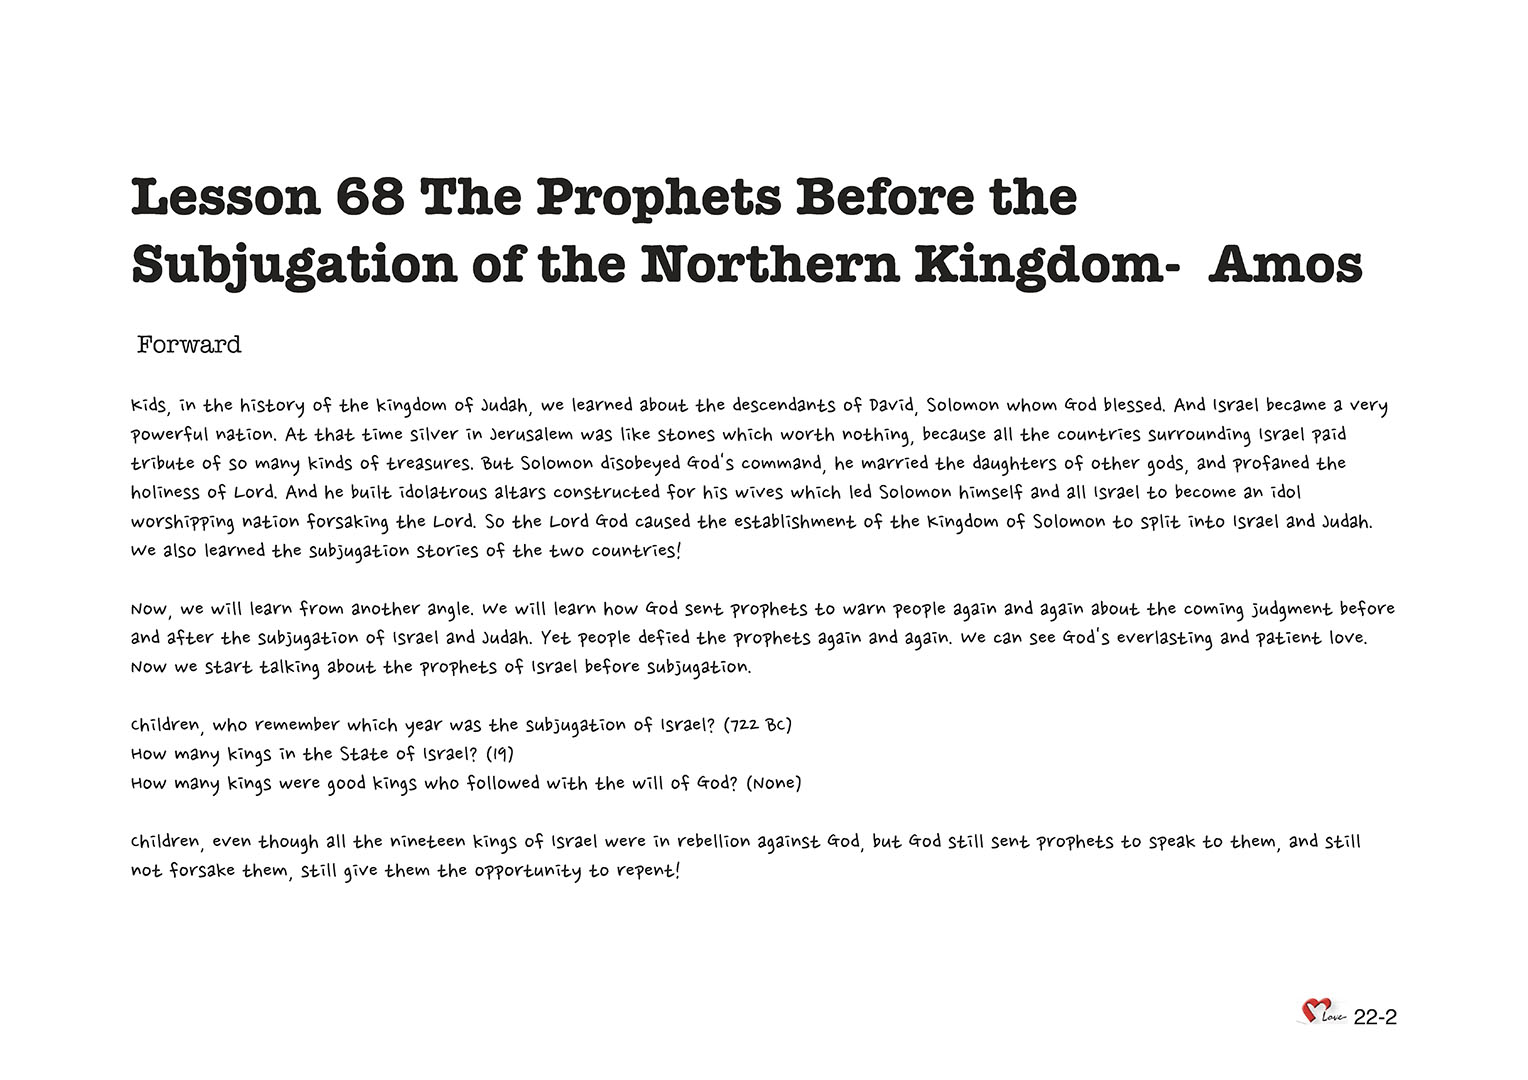 Chapter 22 - Lesson 68 - The Prophets Before the Subjugation of the Northern Kingdom- Amos